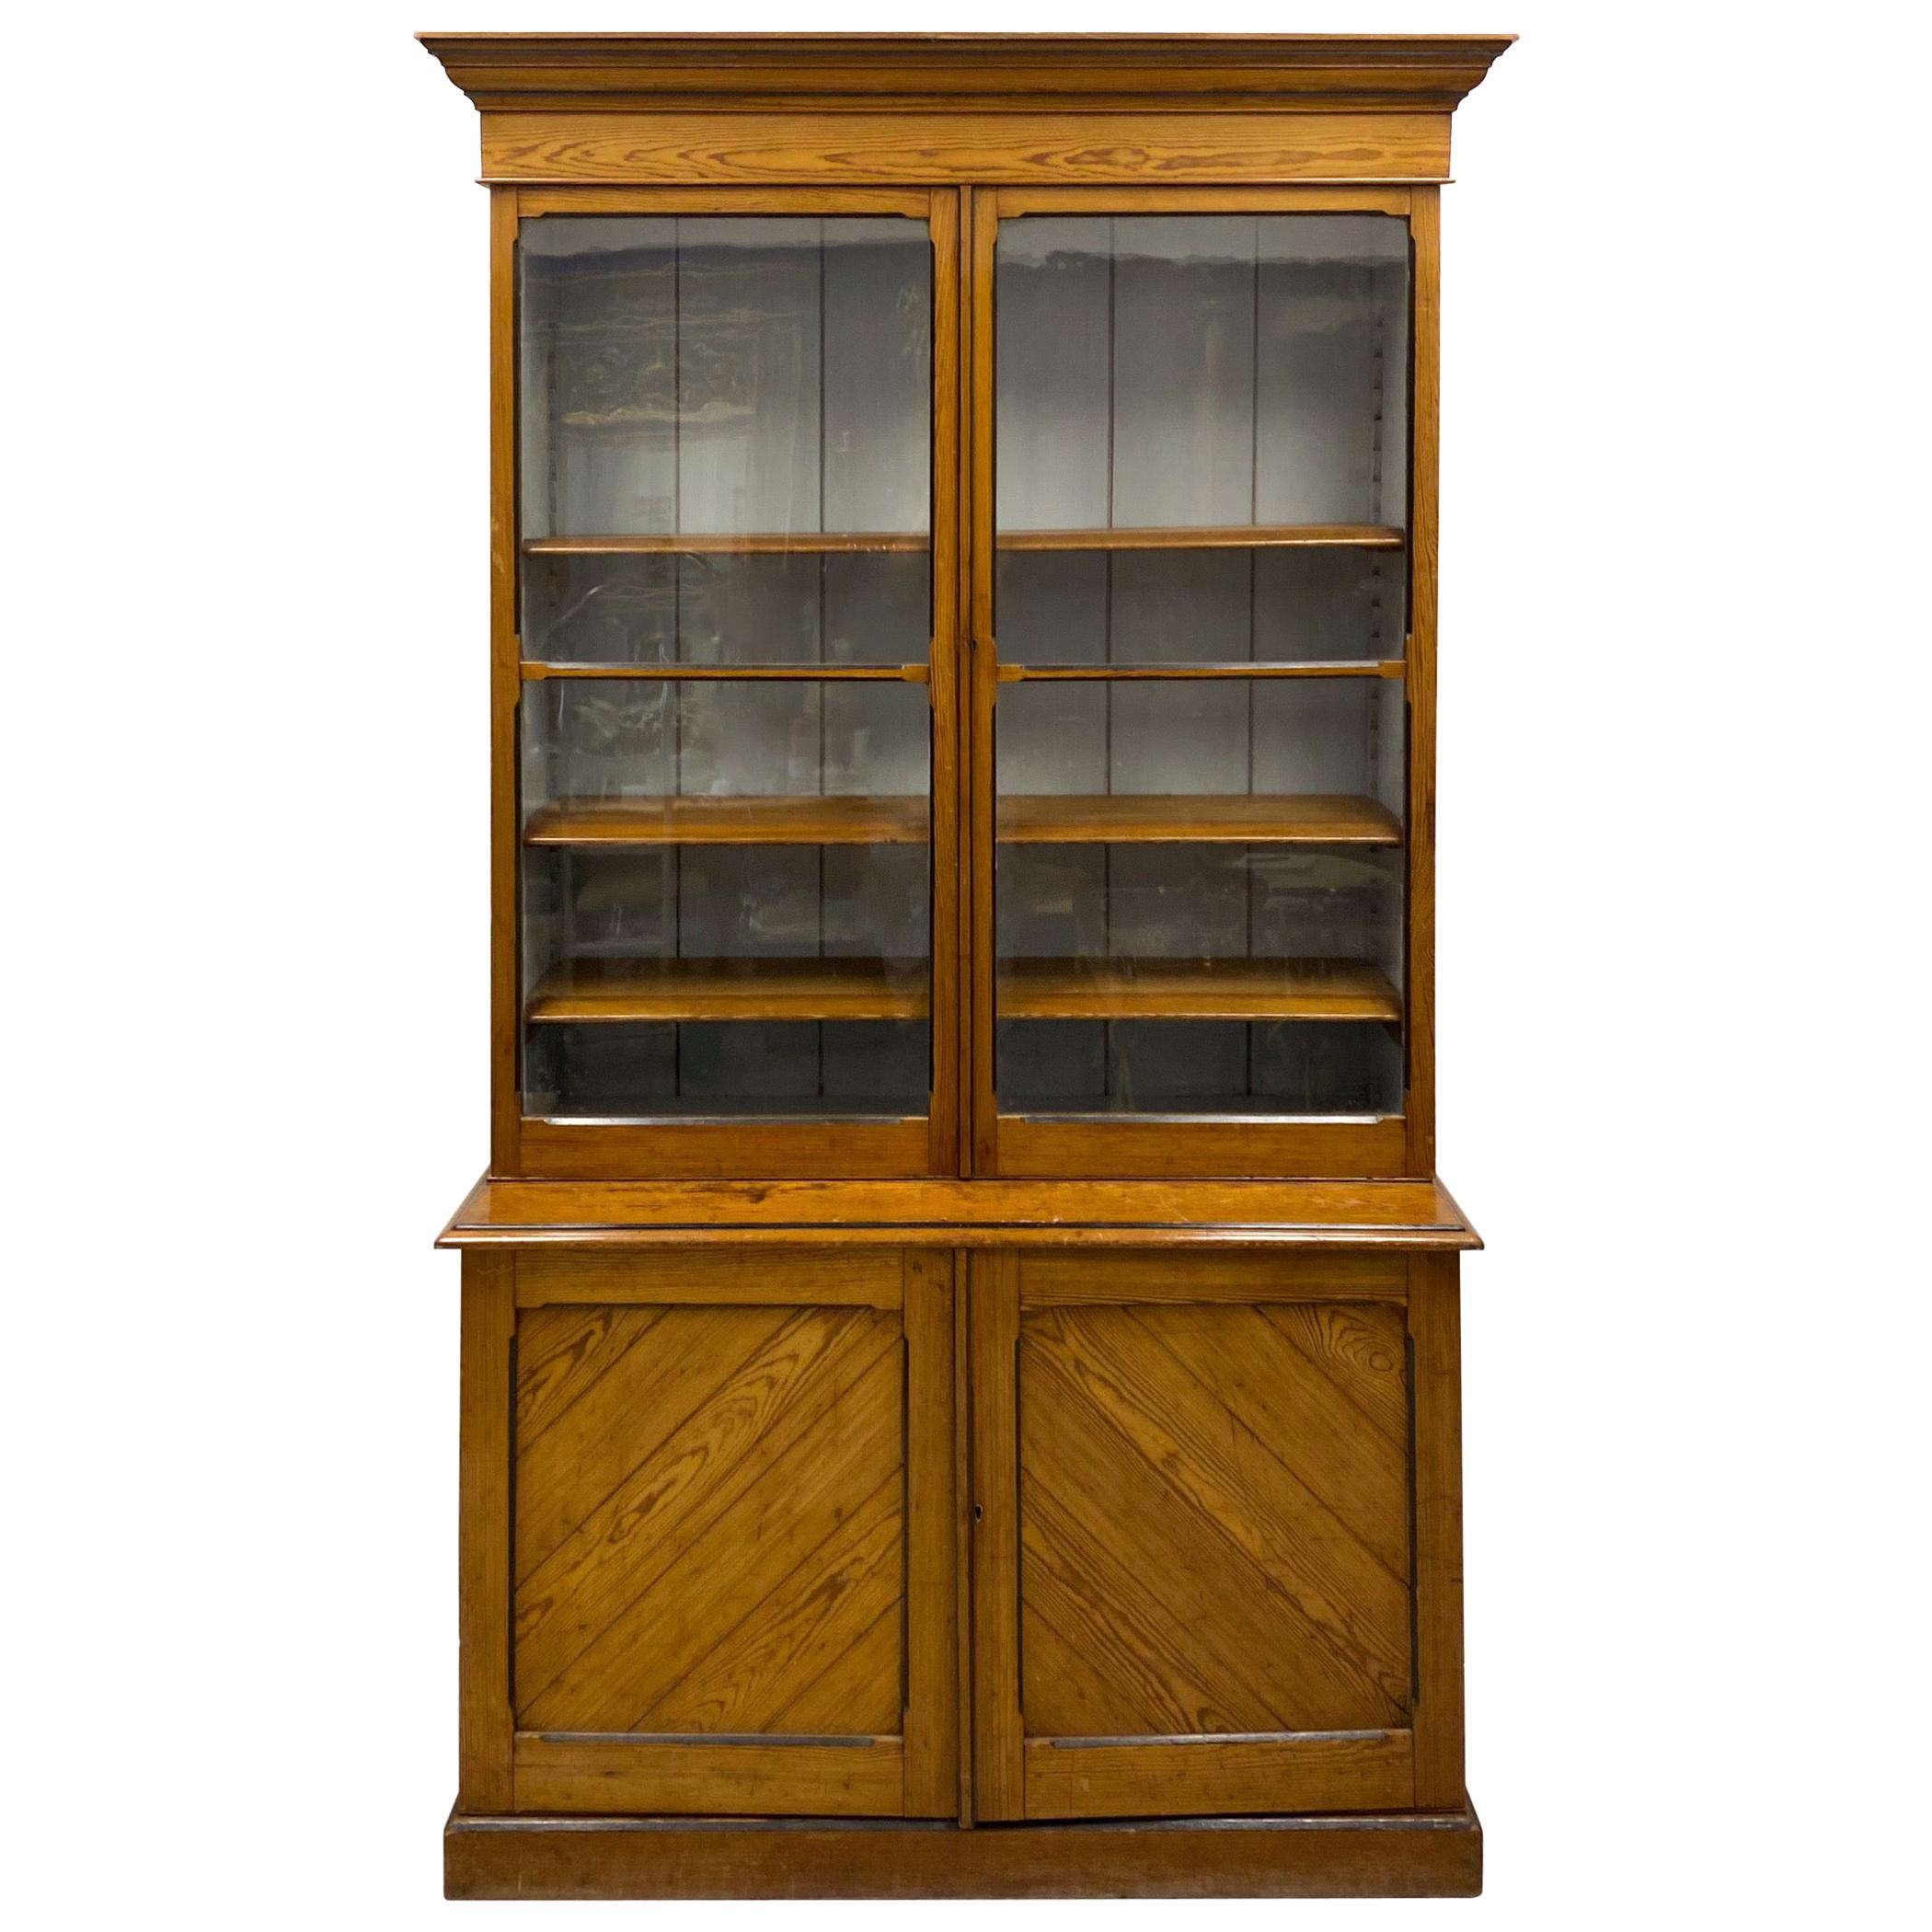 This is a 19th century tall French hard pine cabinet. It does have the original glass as well as tongue in groove construction. The interior is lined with painted beadboard. The top has adjustable shelving, and the base has a single. It does break